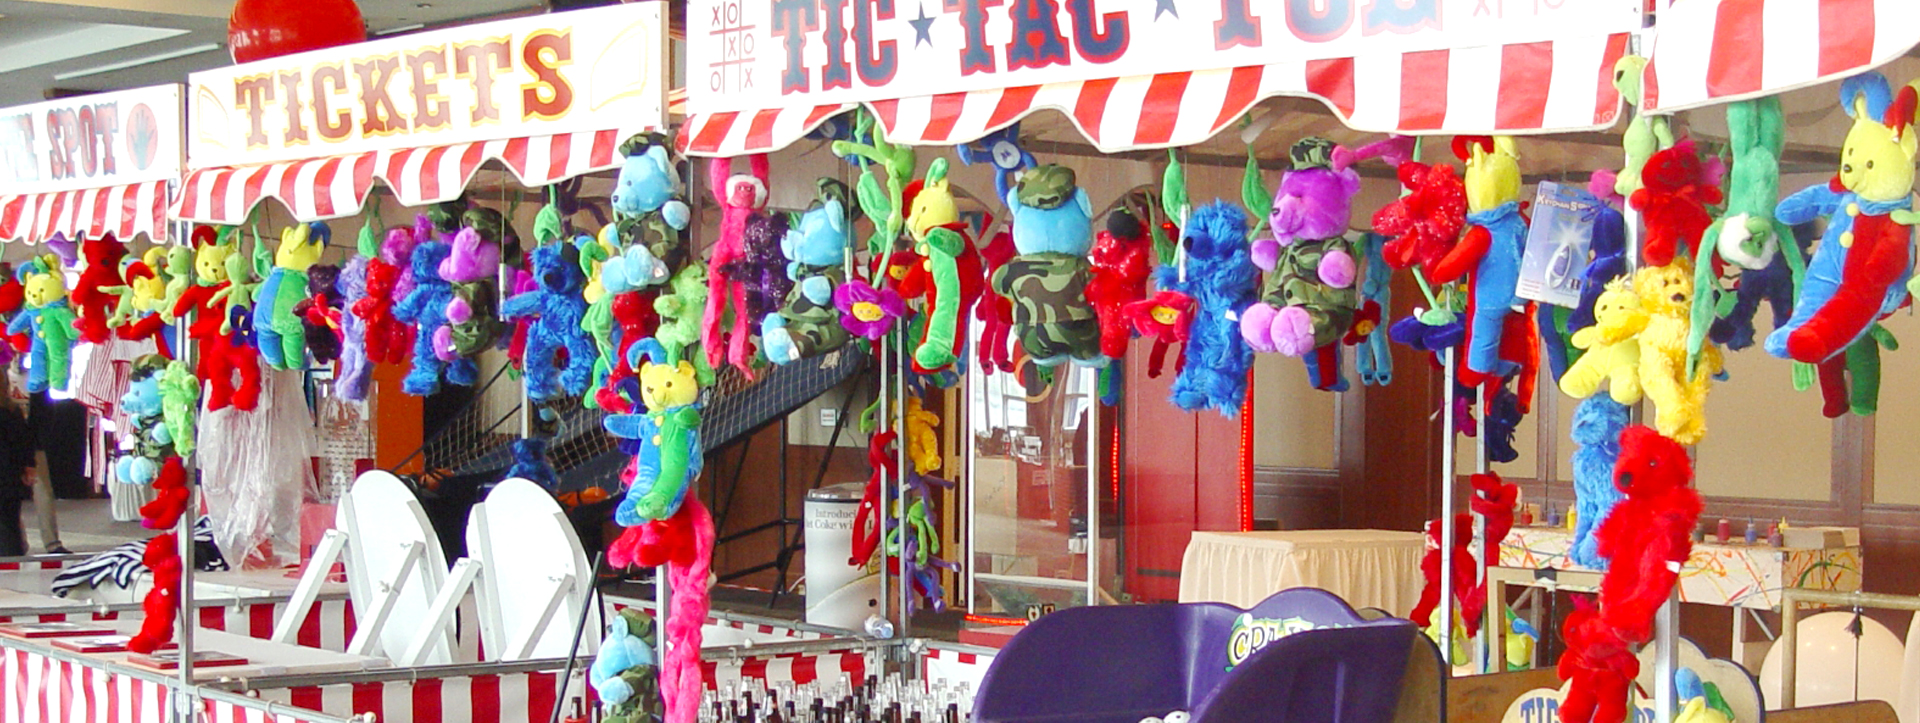 carnival games booth